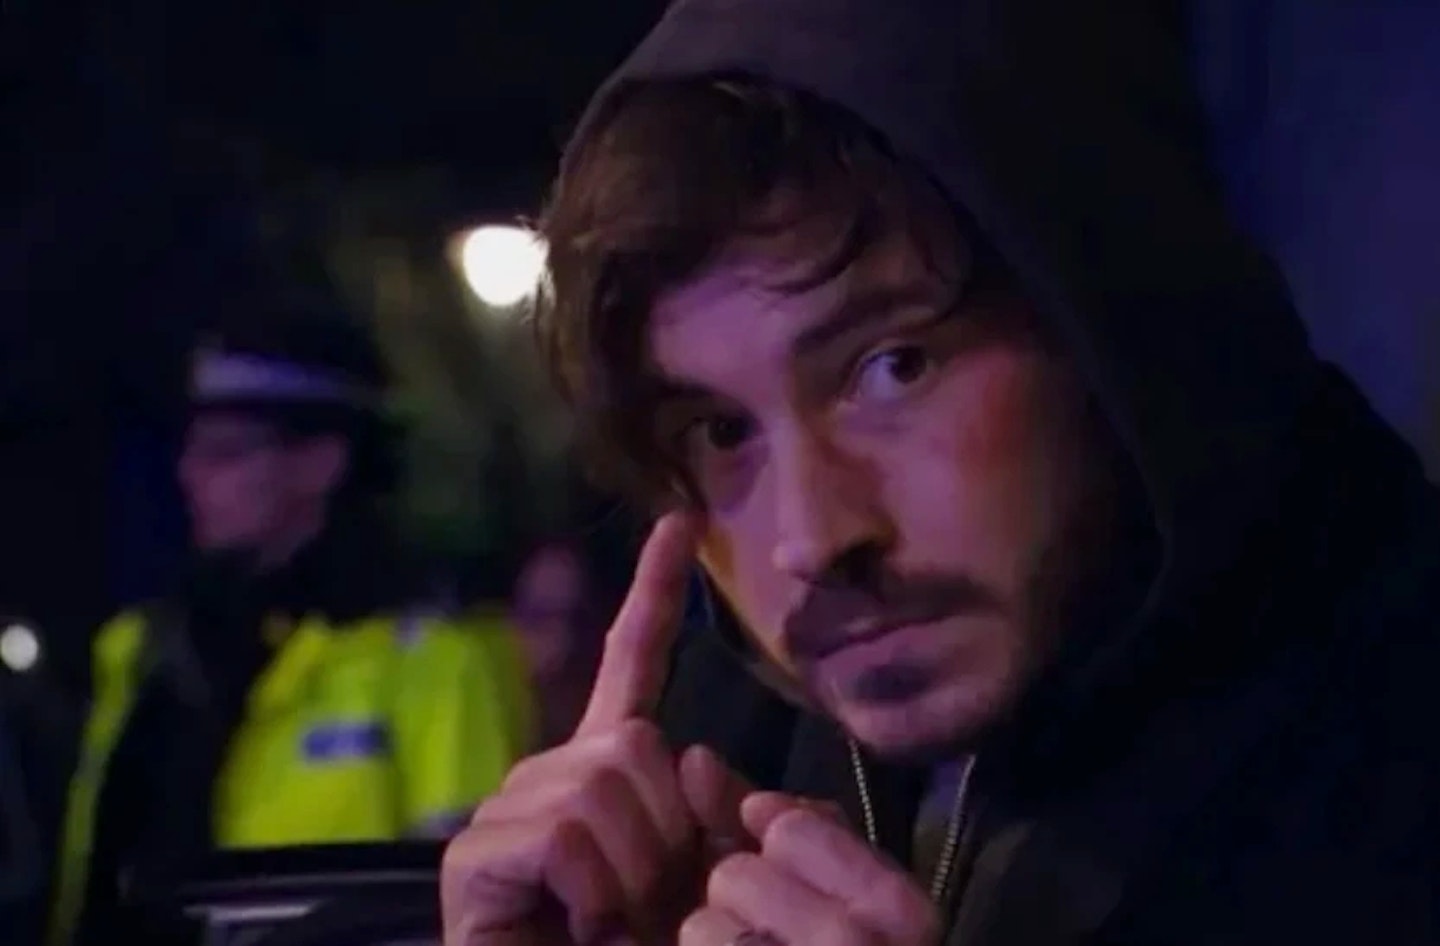 Gray in EastEnders standing near a police officer